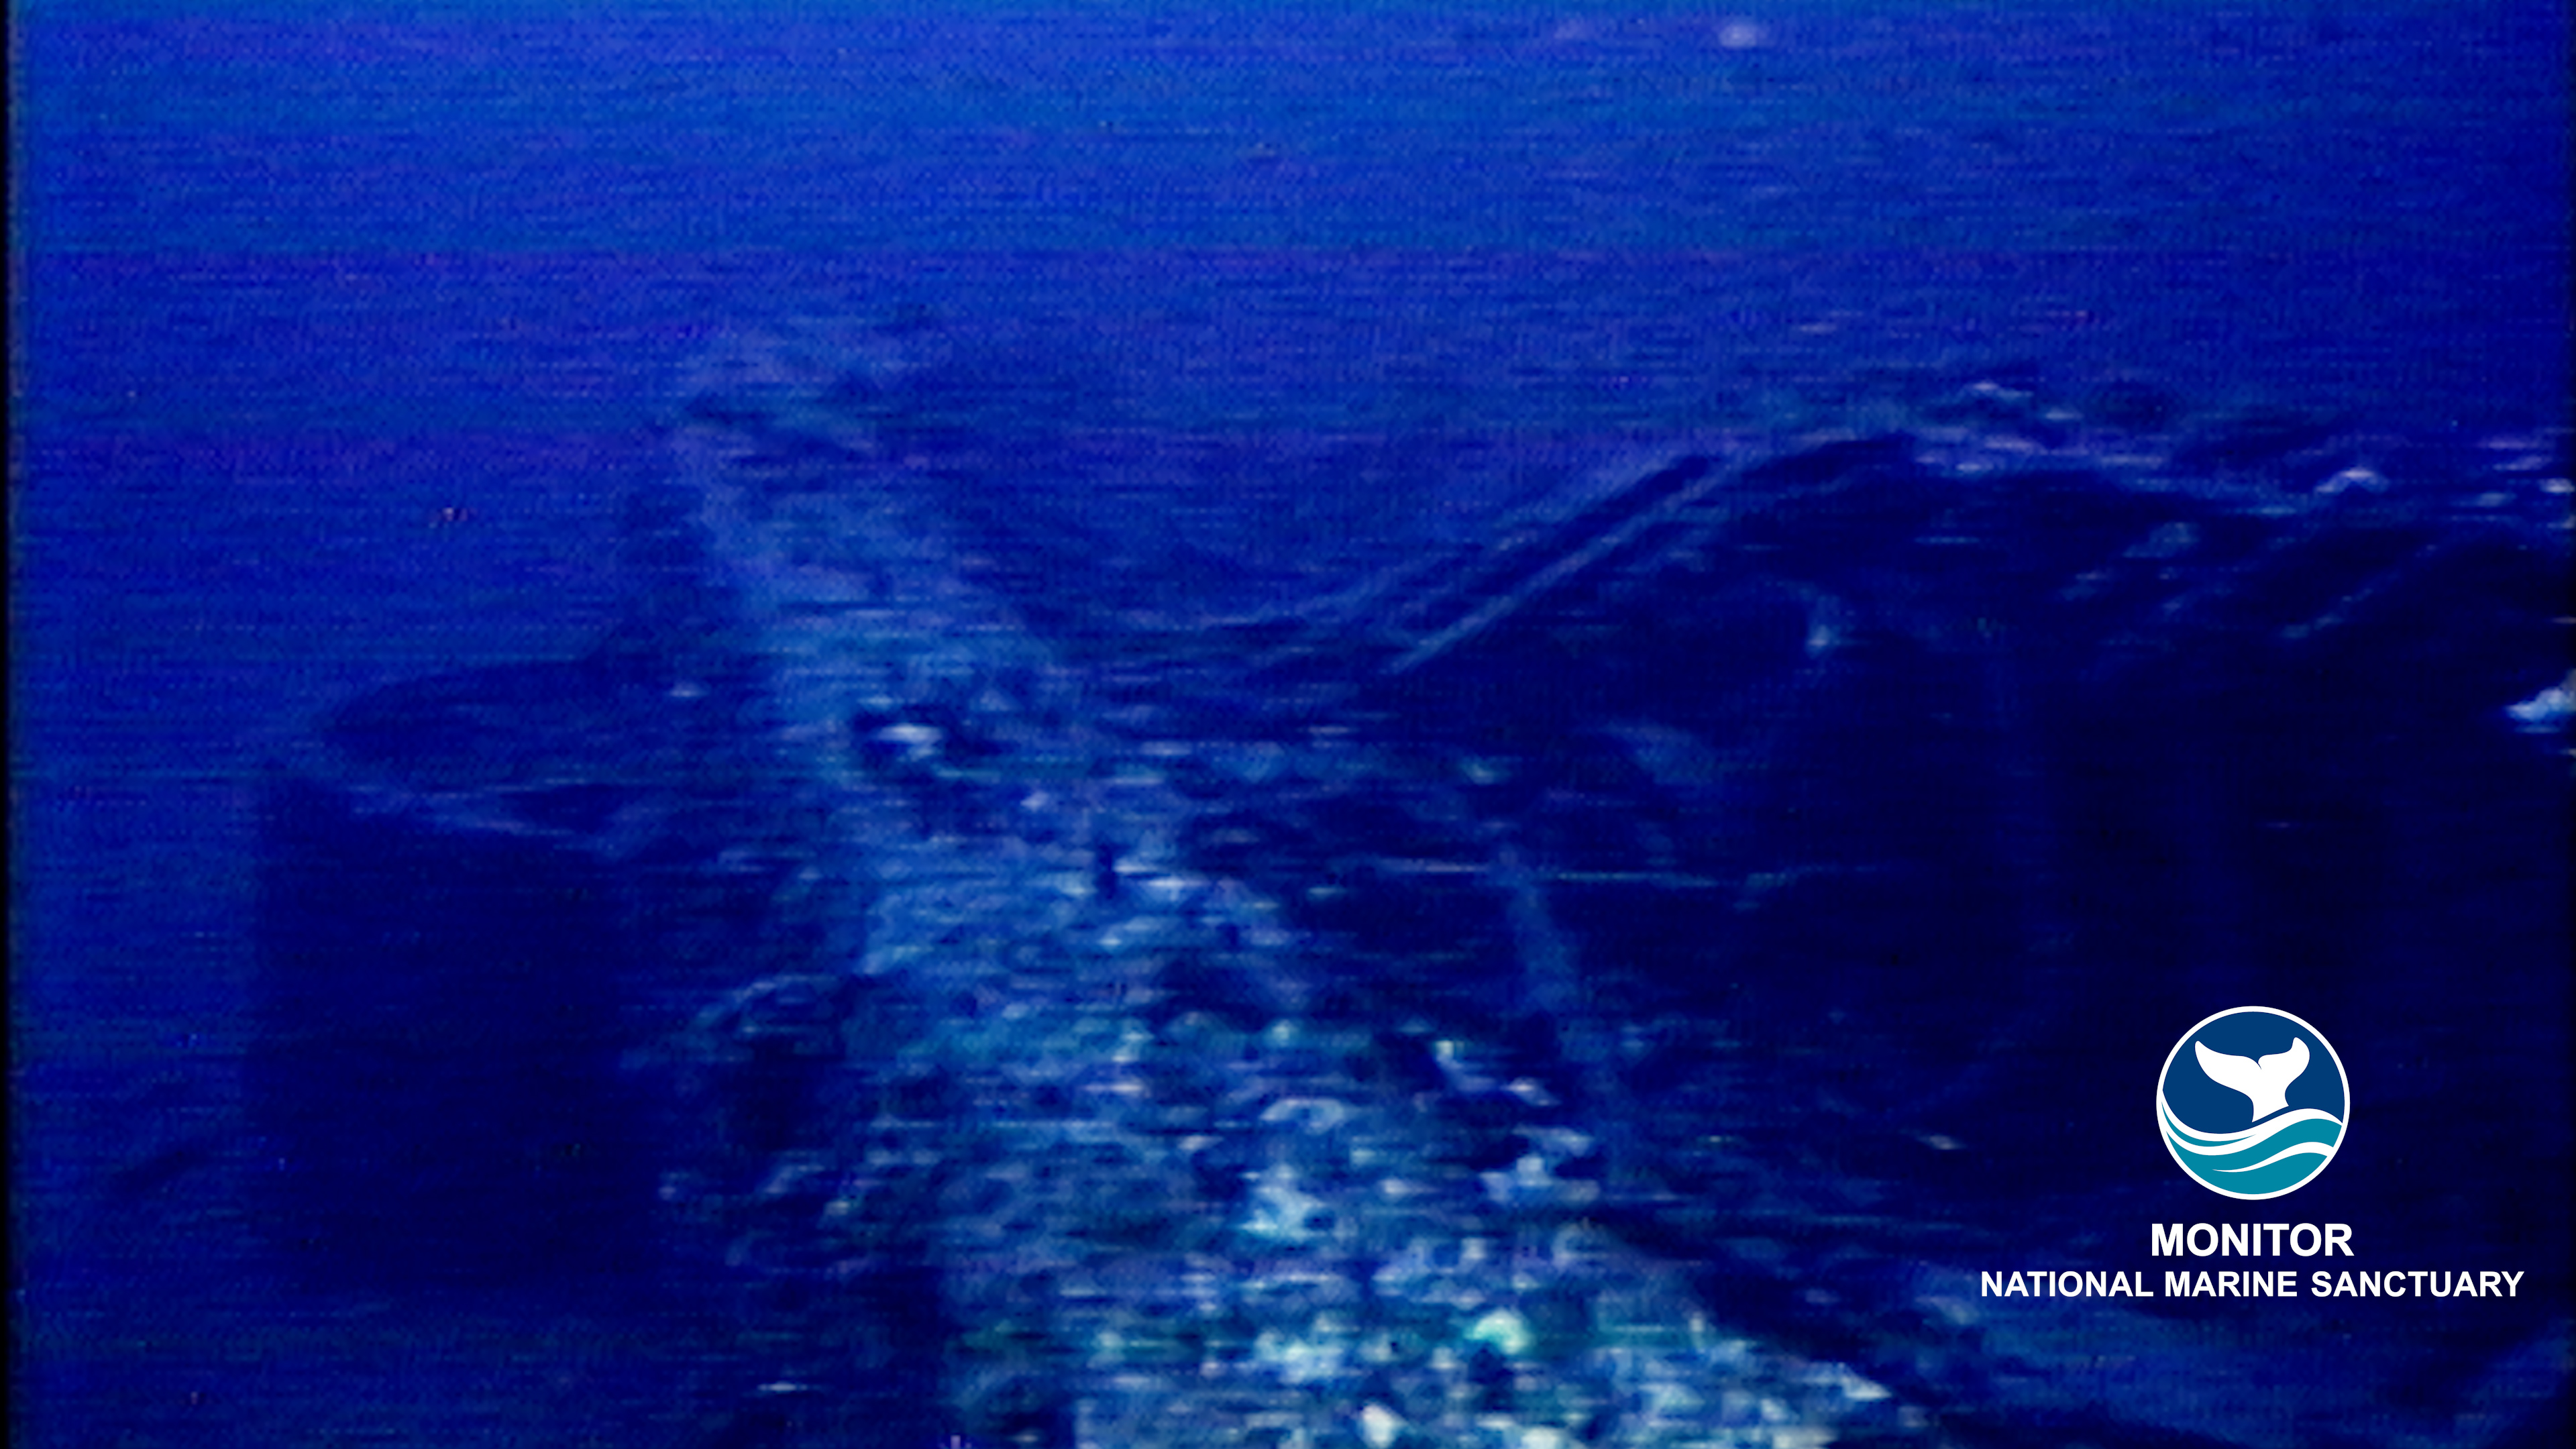 Underwater view of the Monitor National Marine Sanctuary, pre 2001. The Turret can be seen at the left under the edge of the ship.